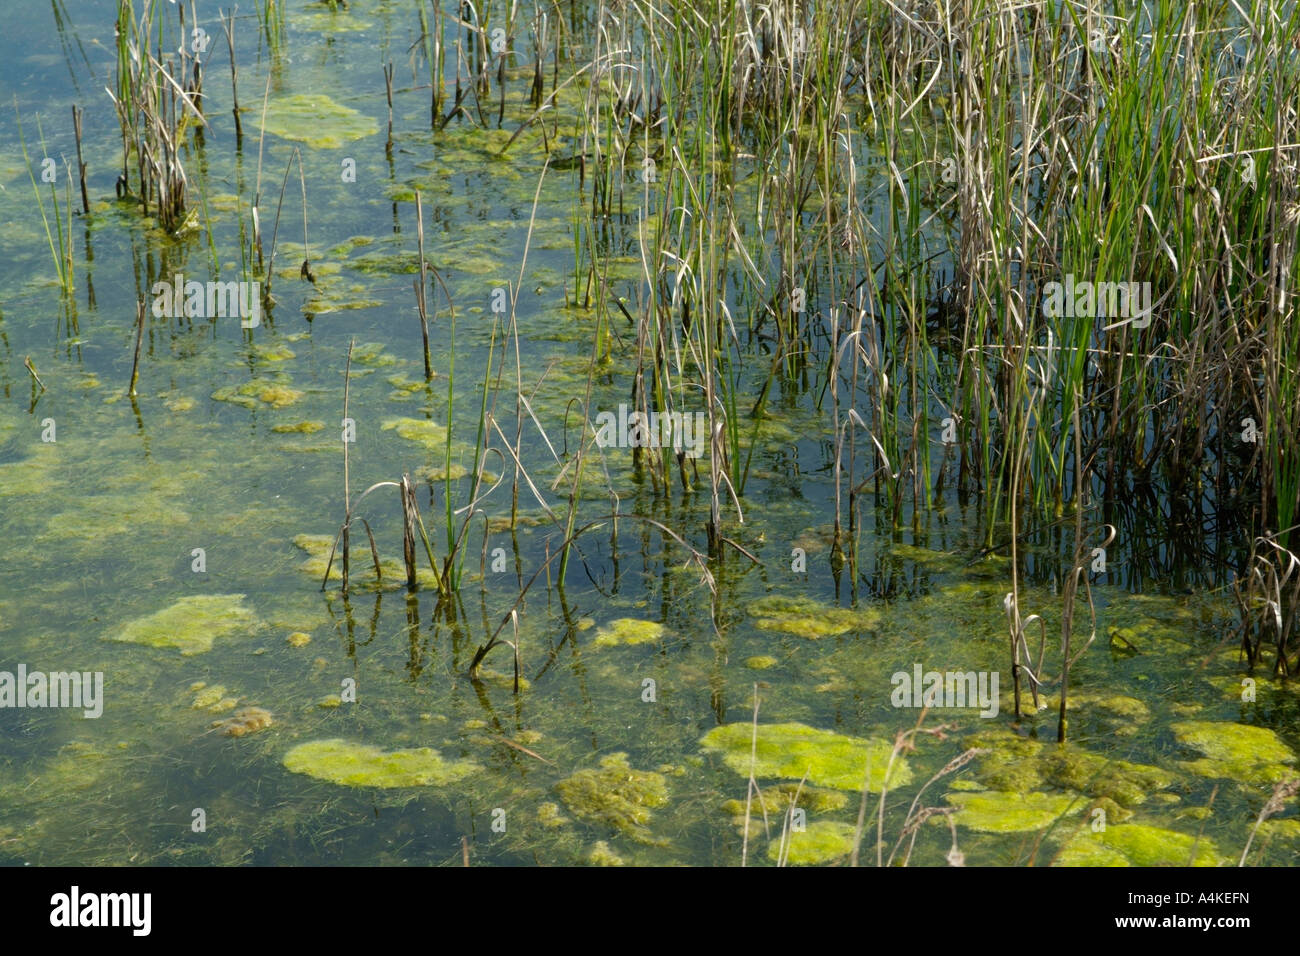 green algal slime with reeds Stock Photo